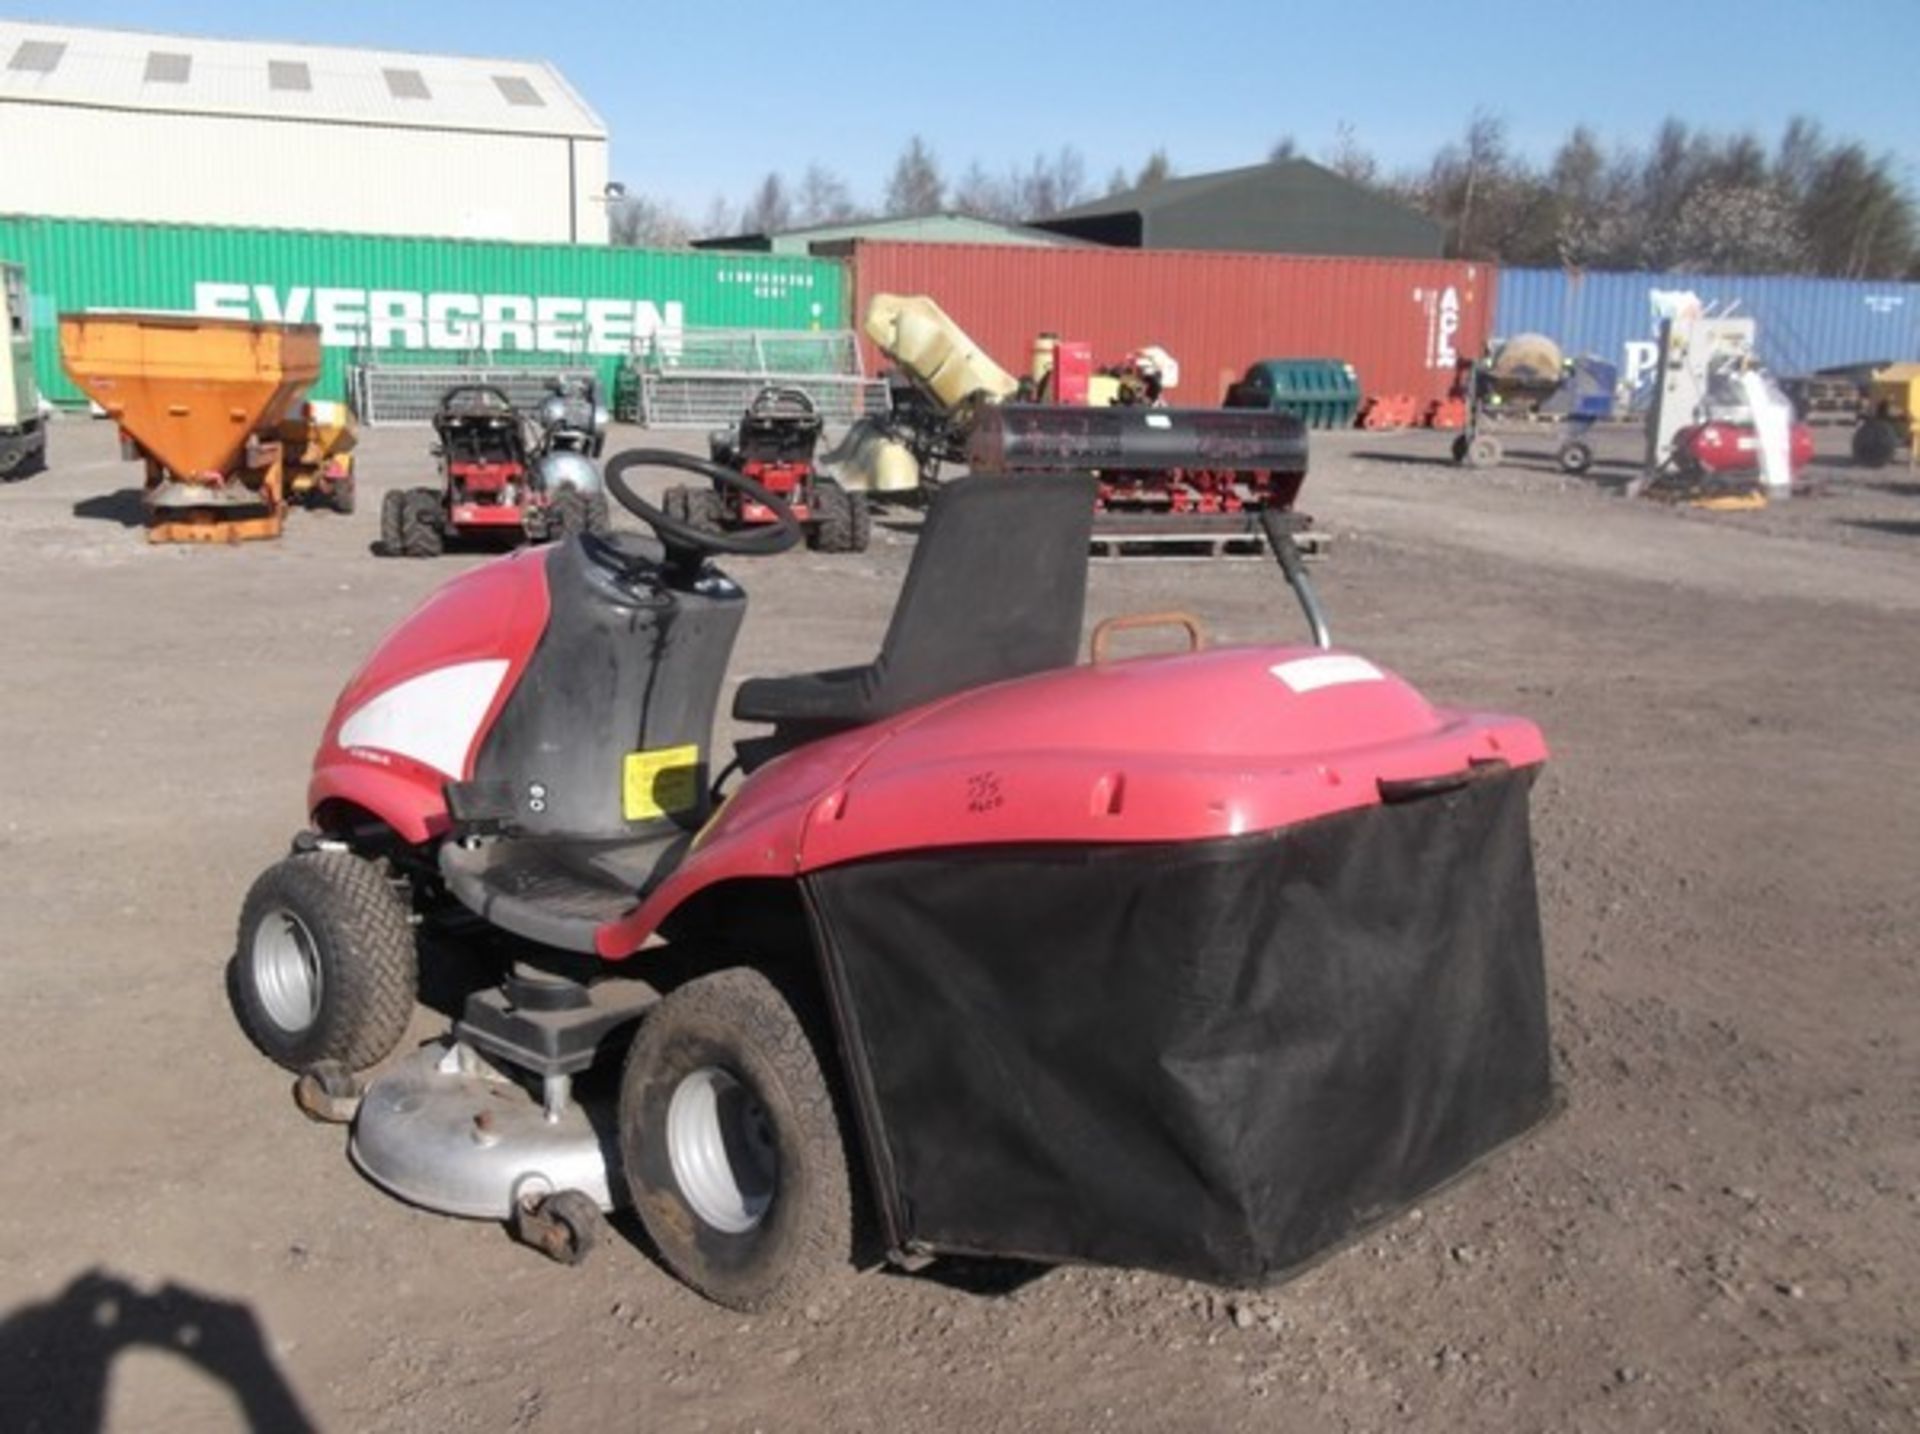 RIDE ON MOWER AG122/18H 48" DECK. HYDROSTATIC DRIVE, 18HPV TWIN BRIGGS & STRATTON ENGINE - Image 4 of 5